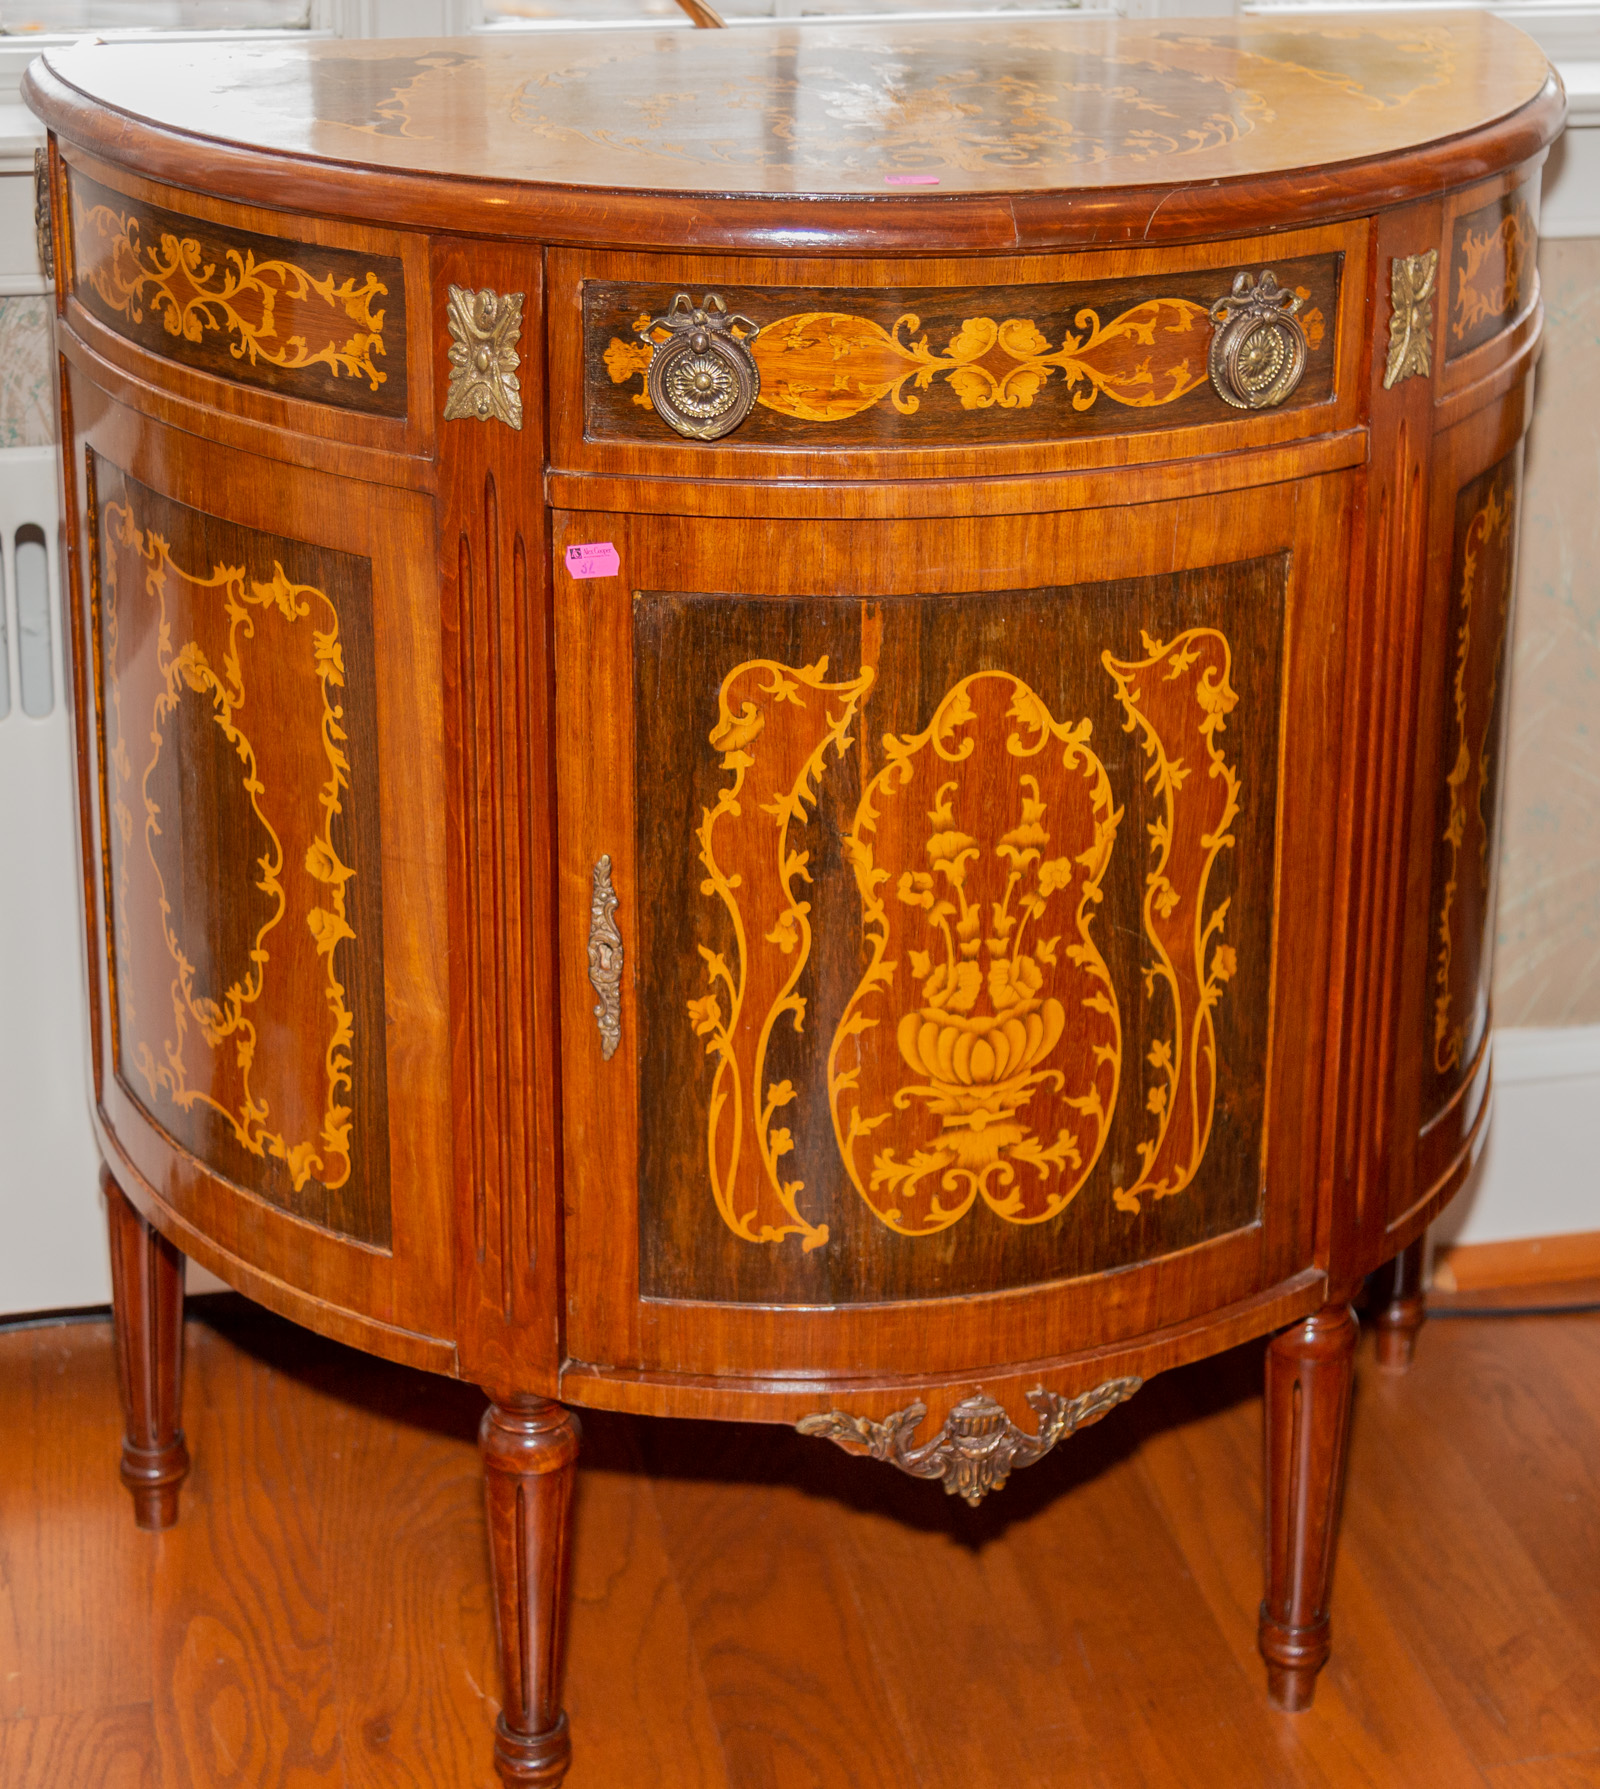 A LOUIS XV STYLE MARQUETRY DEMILUNE